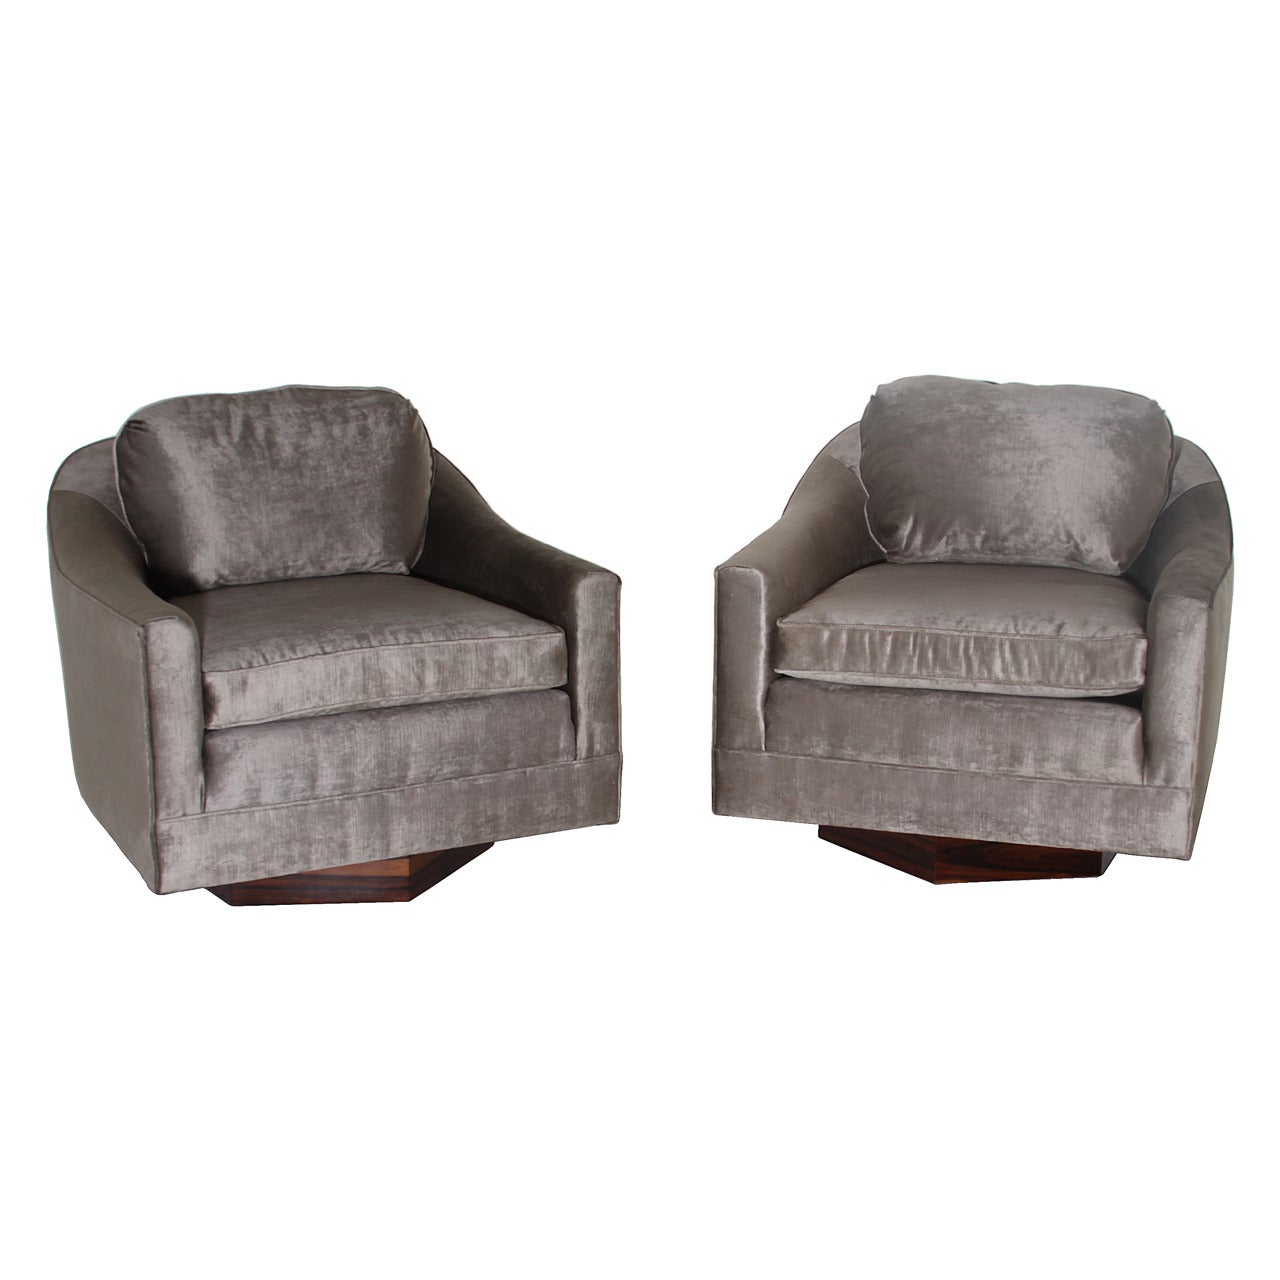 Pair of Velvet Swivel Chairs with Rosewood Hexagon Shaped Bases by Milo Baughman